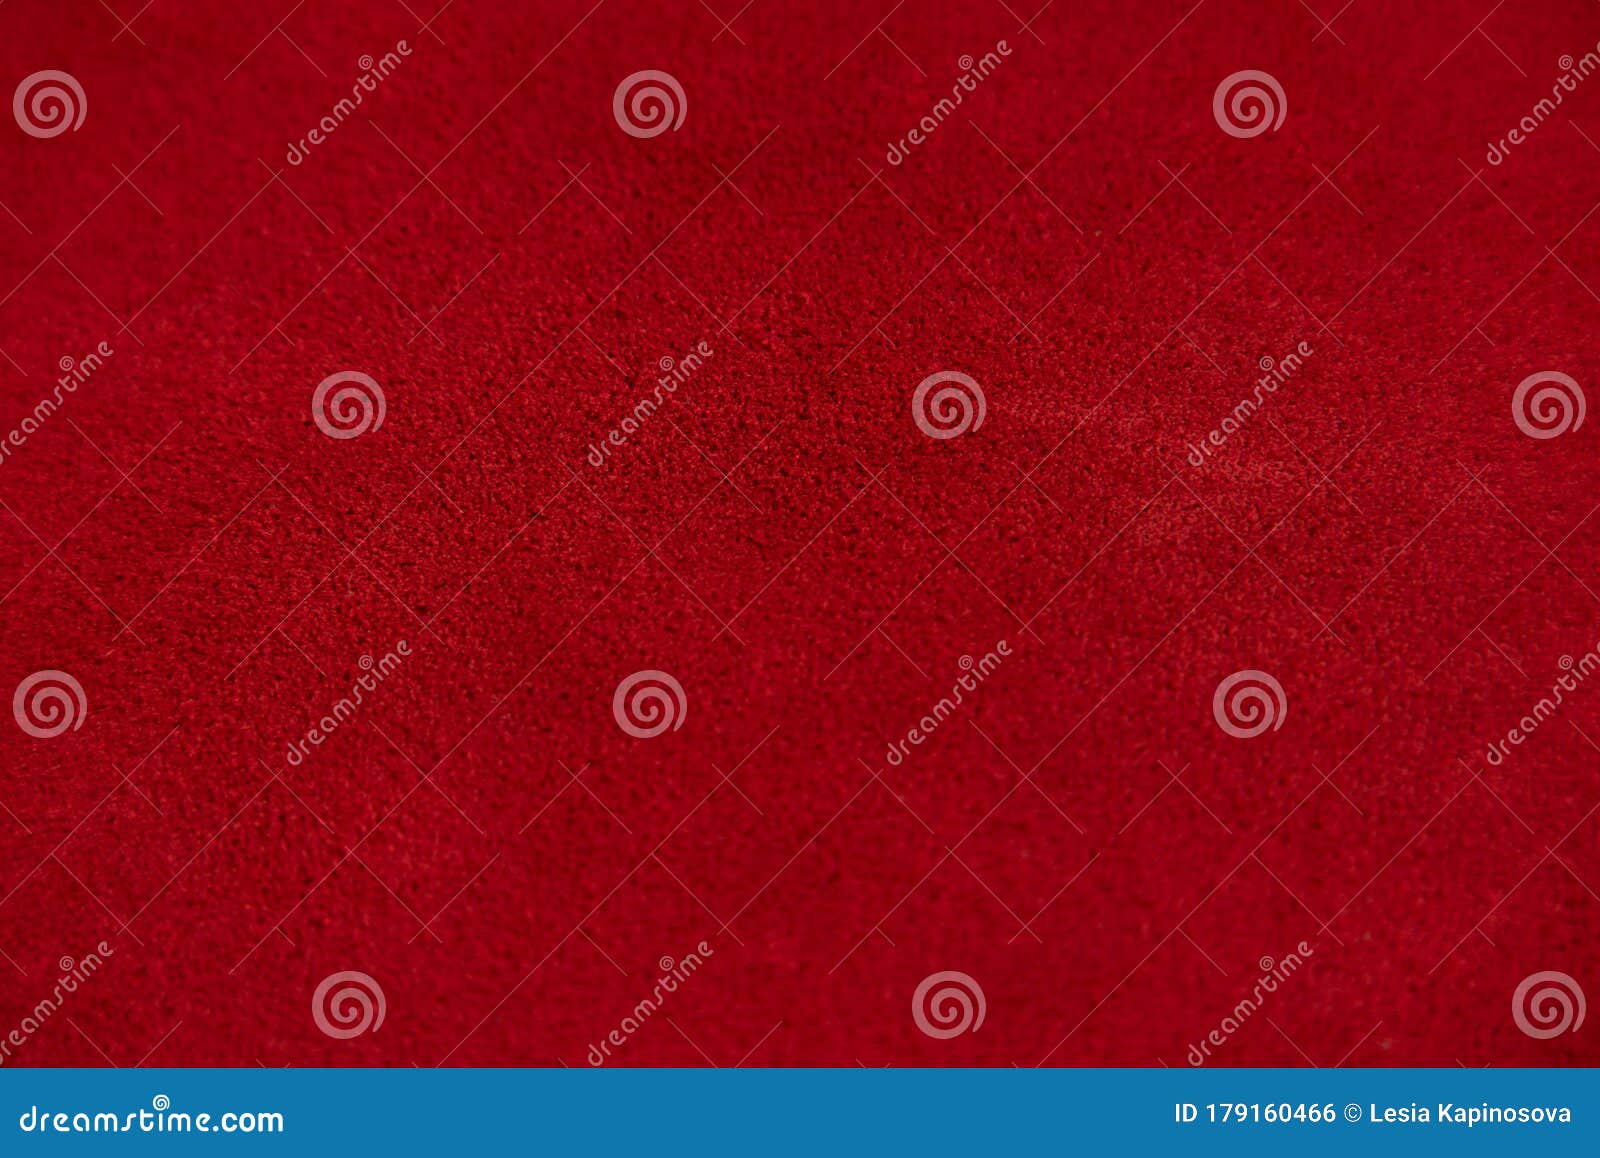 dark red matte background of suede fabric, closeup. velvet texture of seamless wine leather. felt material macro.